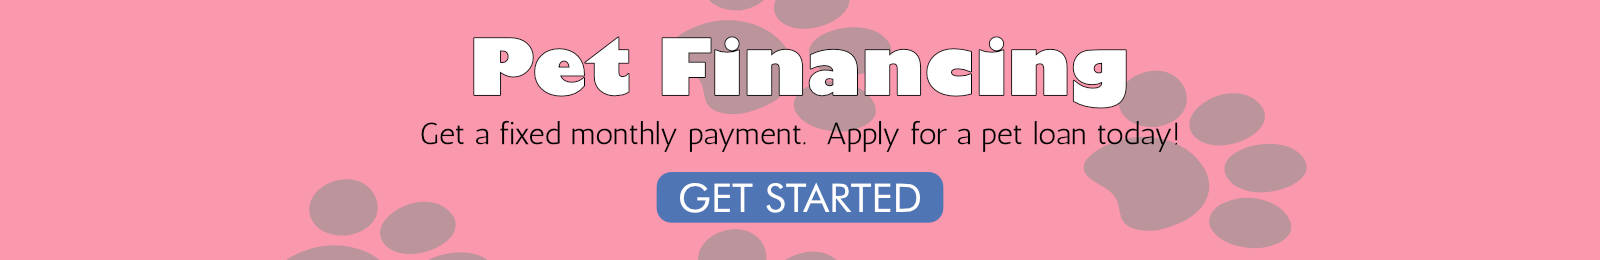 Pet Financing Pet Payments with Petite Posh Puppies